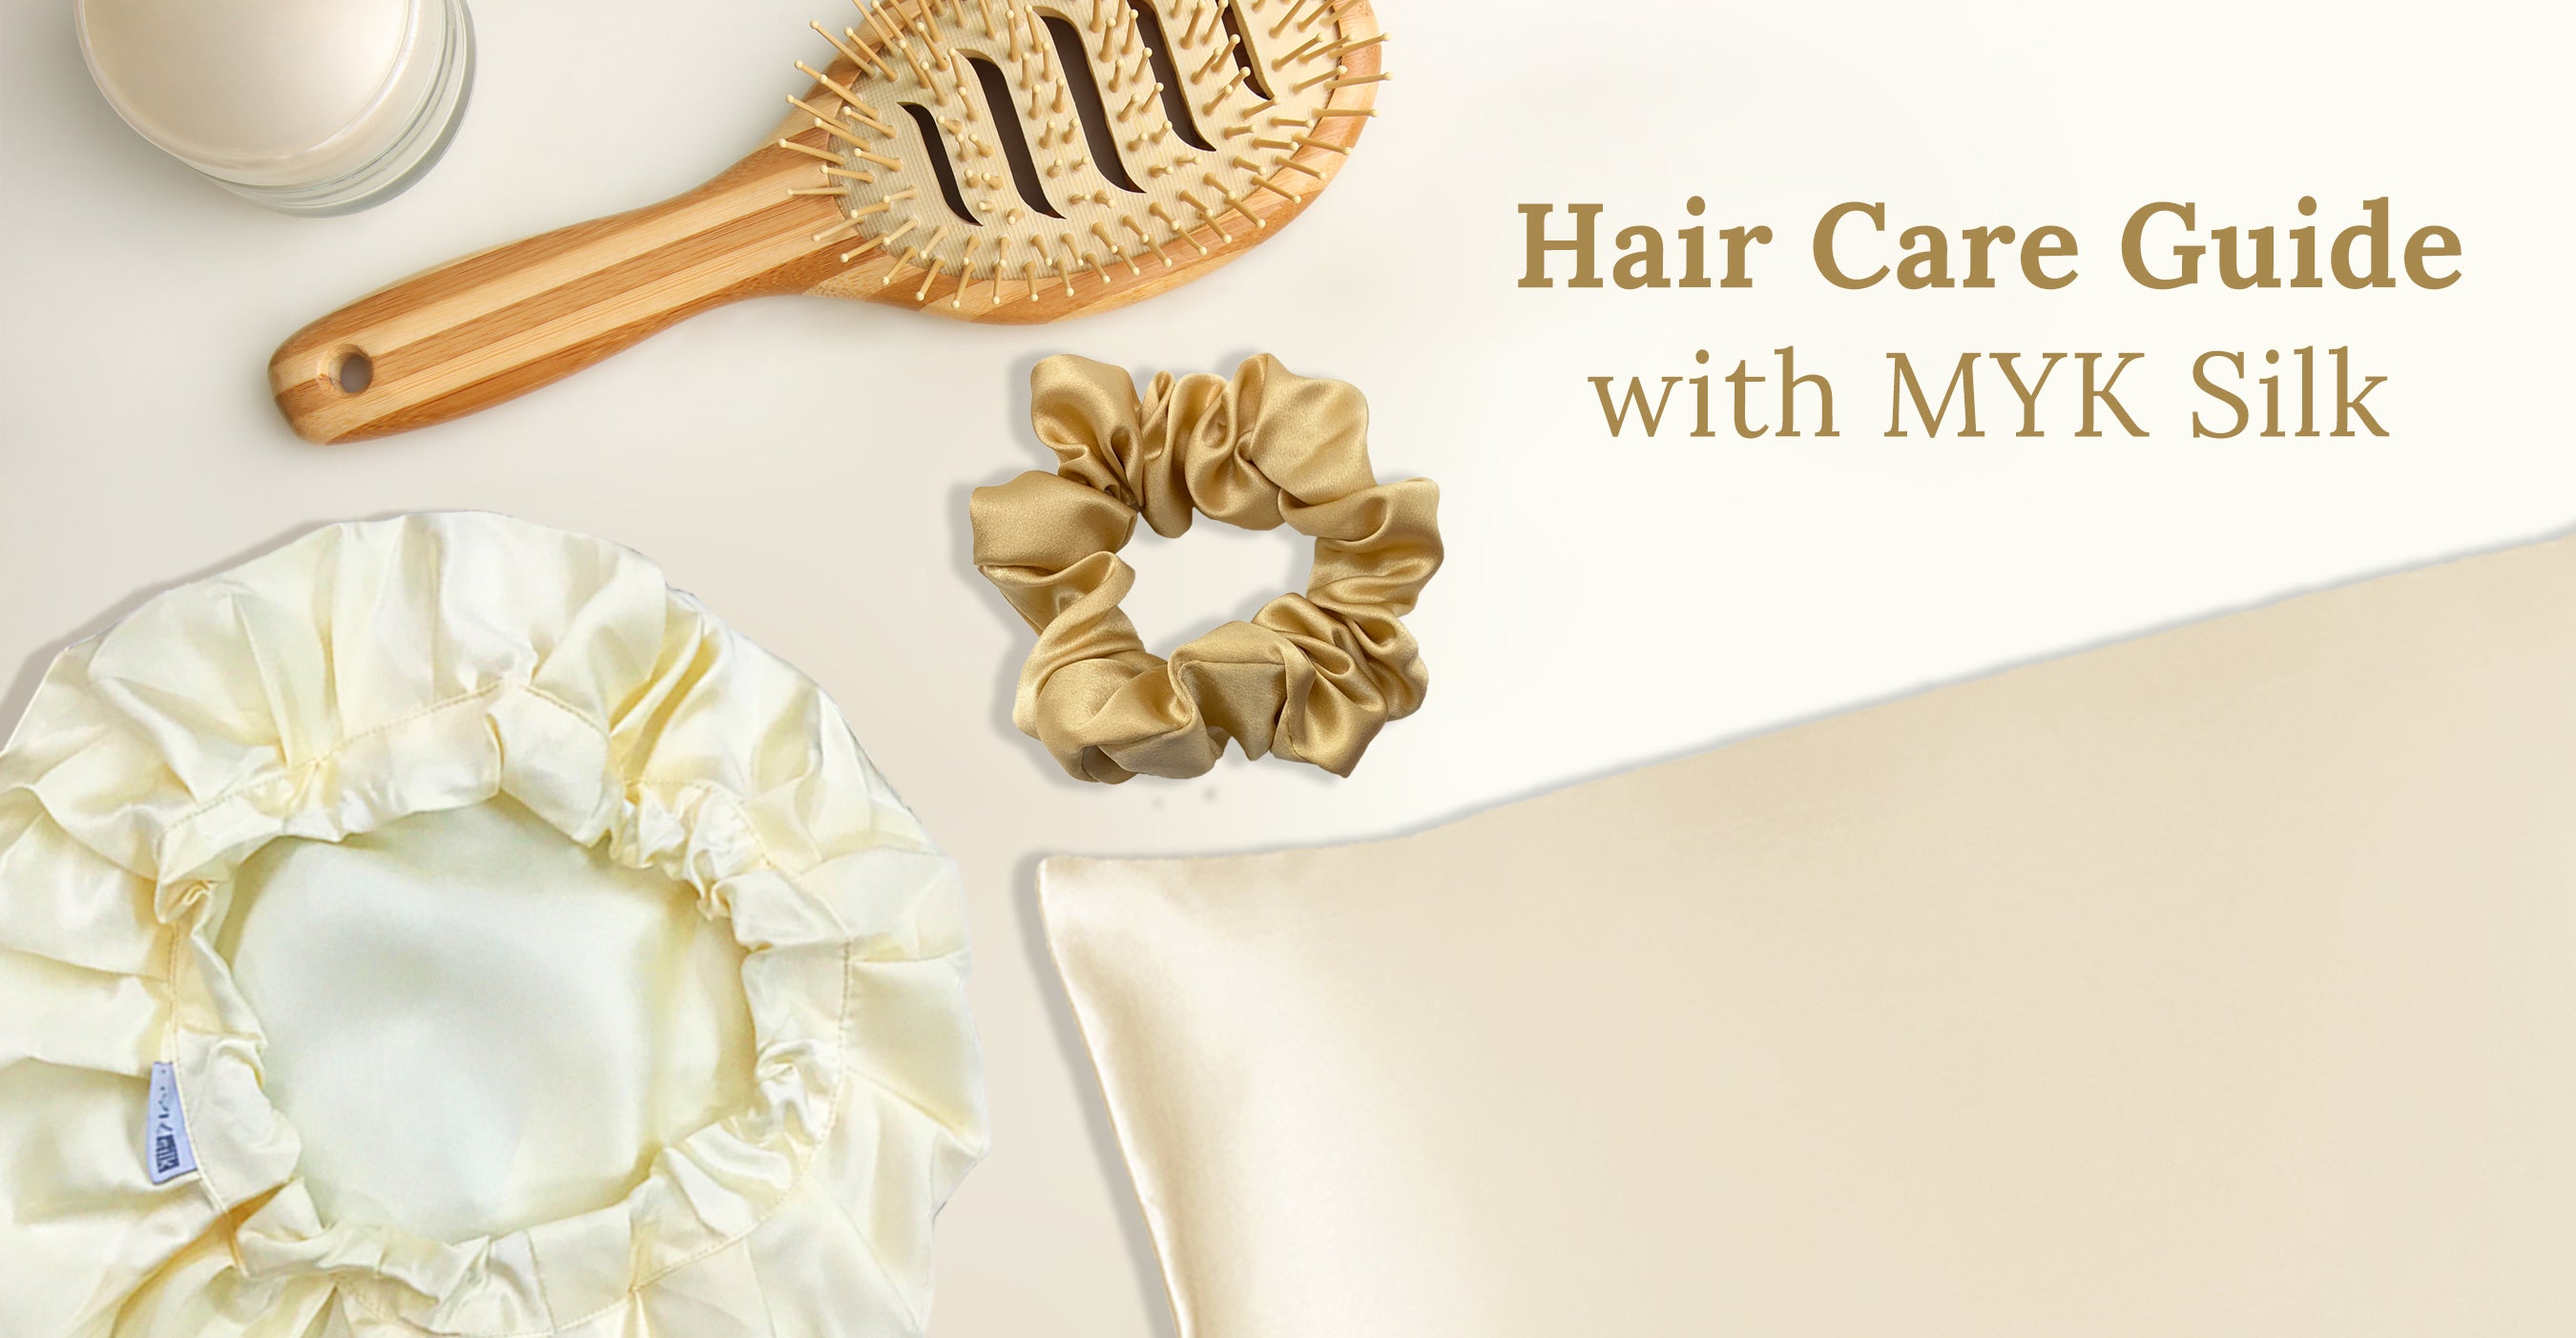 Hair Care Guide with MYK Silk